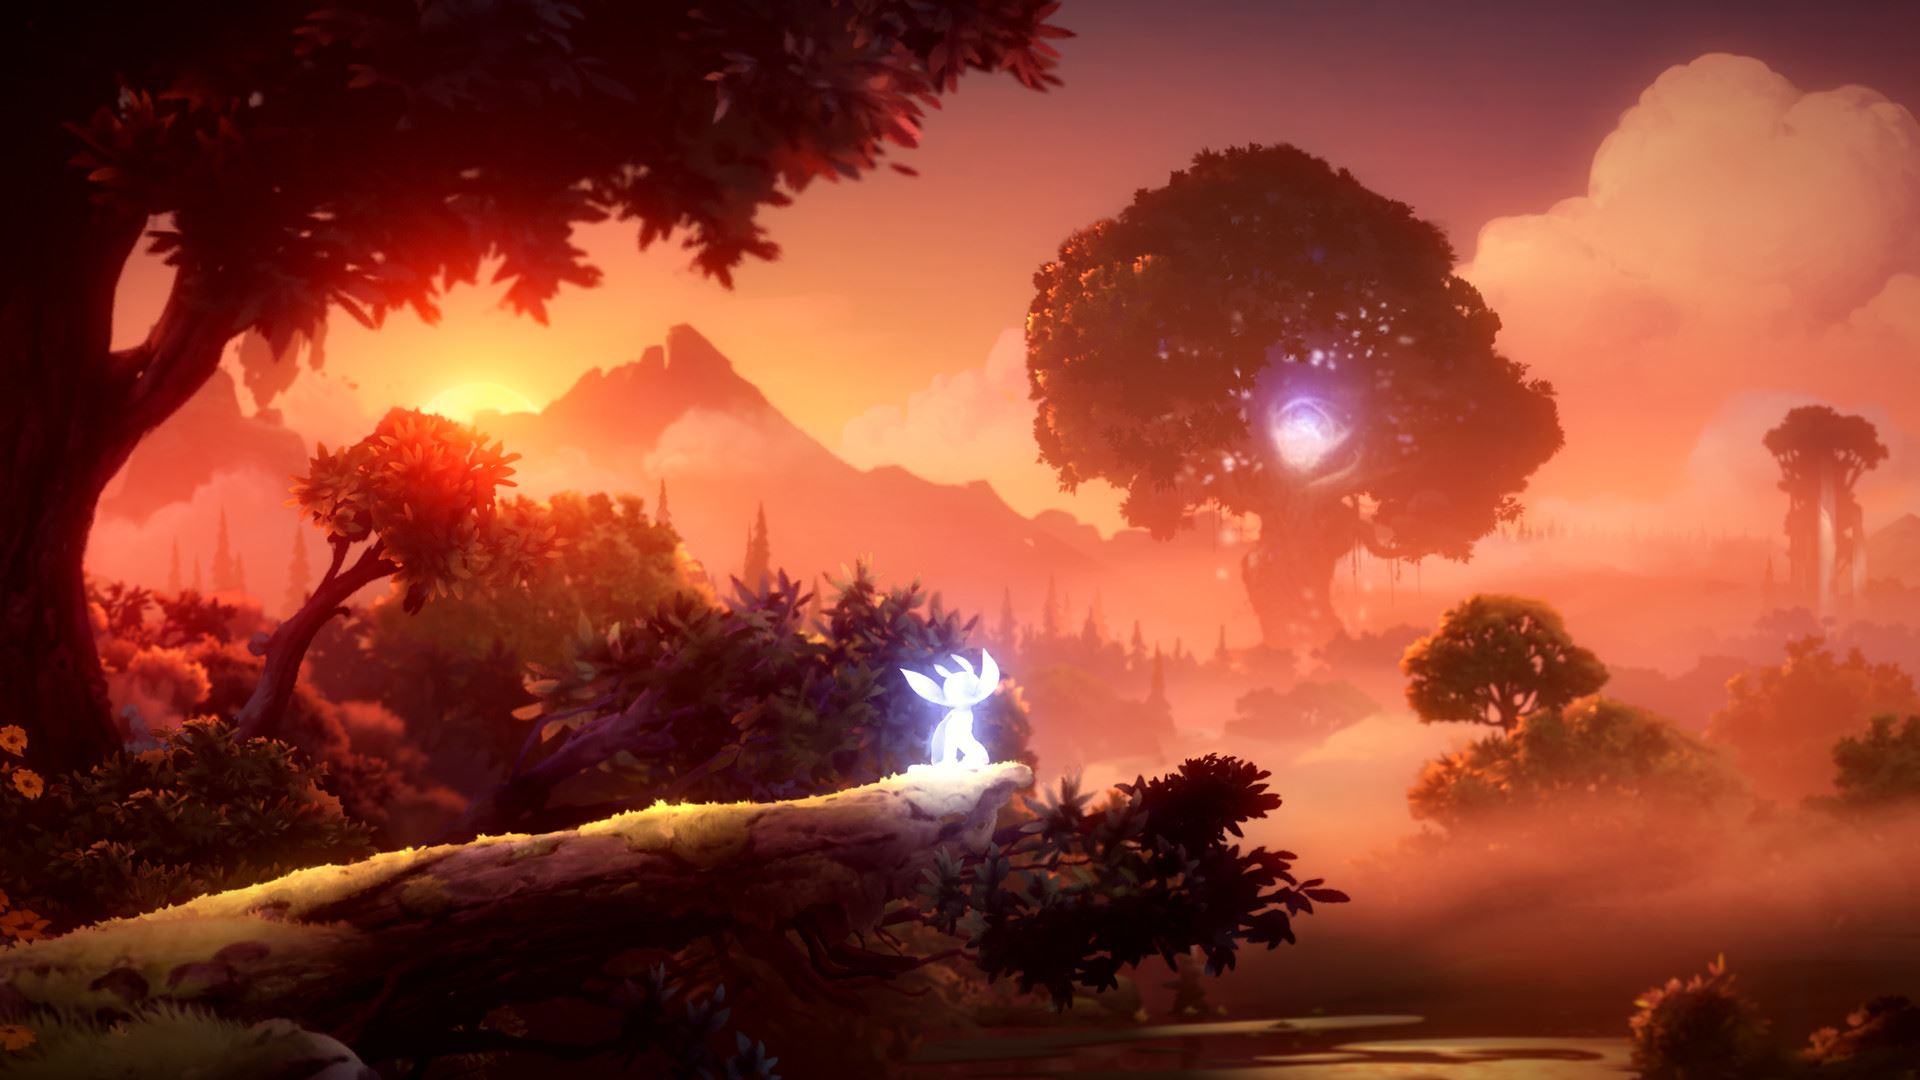 ori-and-the-will-of-the-wisps-image-3